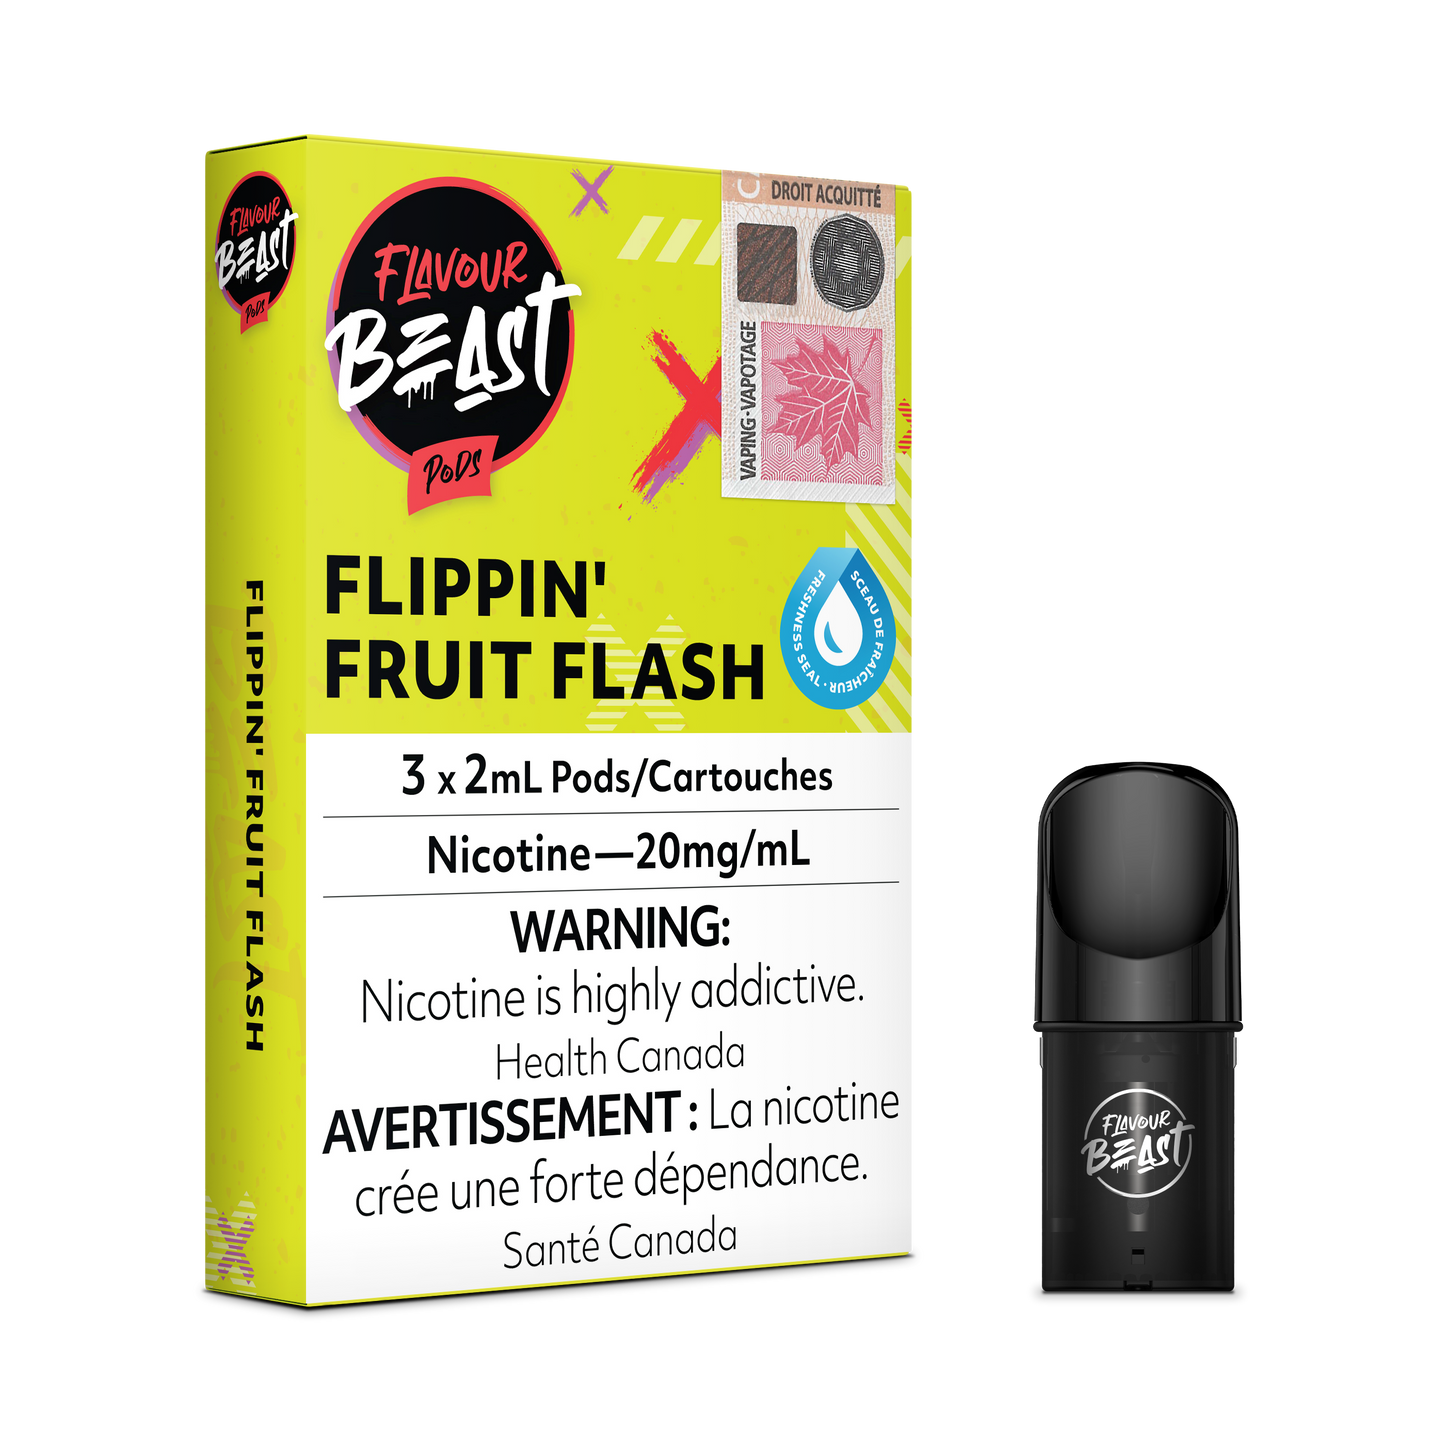 Flippin Fruit Flash by Flavour Beast Pods